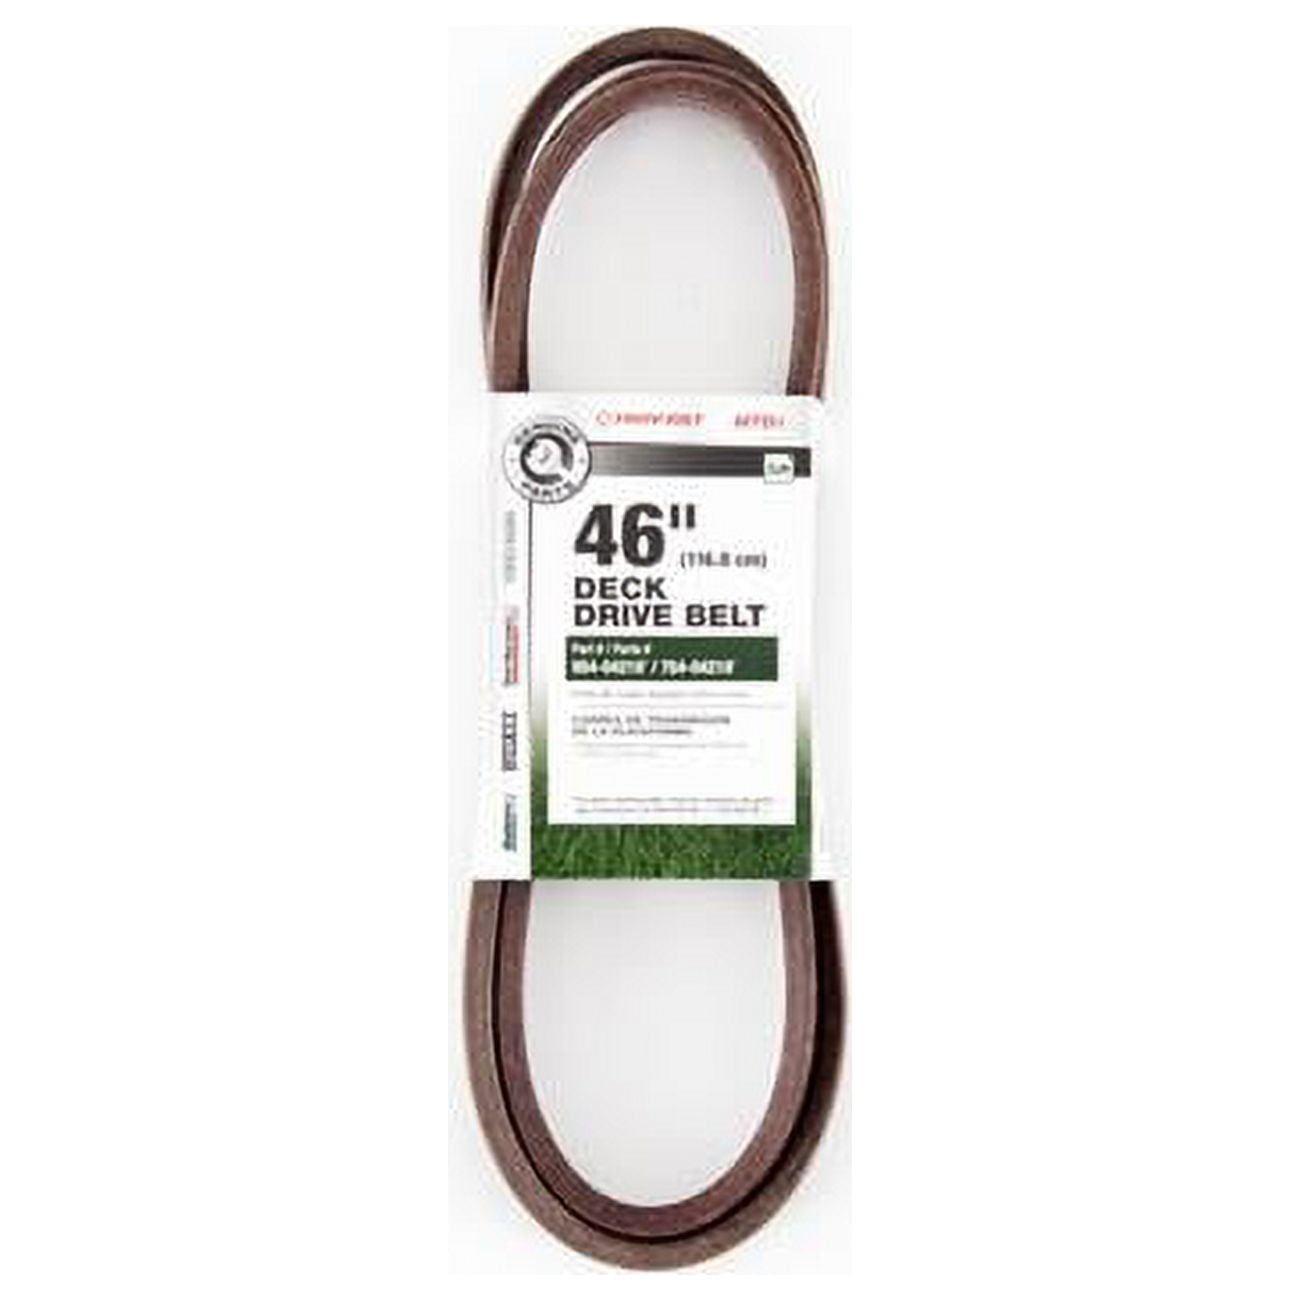 7002880 5 X 16 In. Deck Drive Belt For Riding Mowers